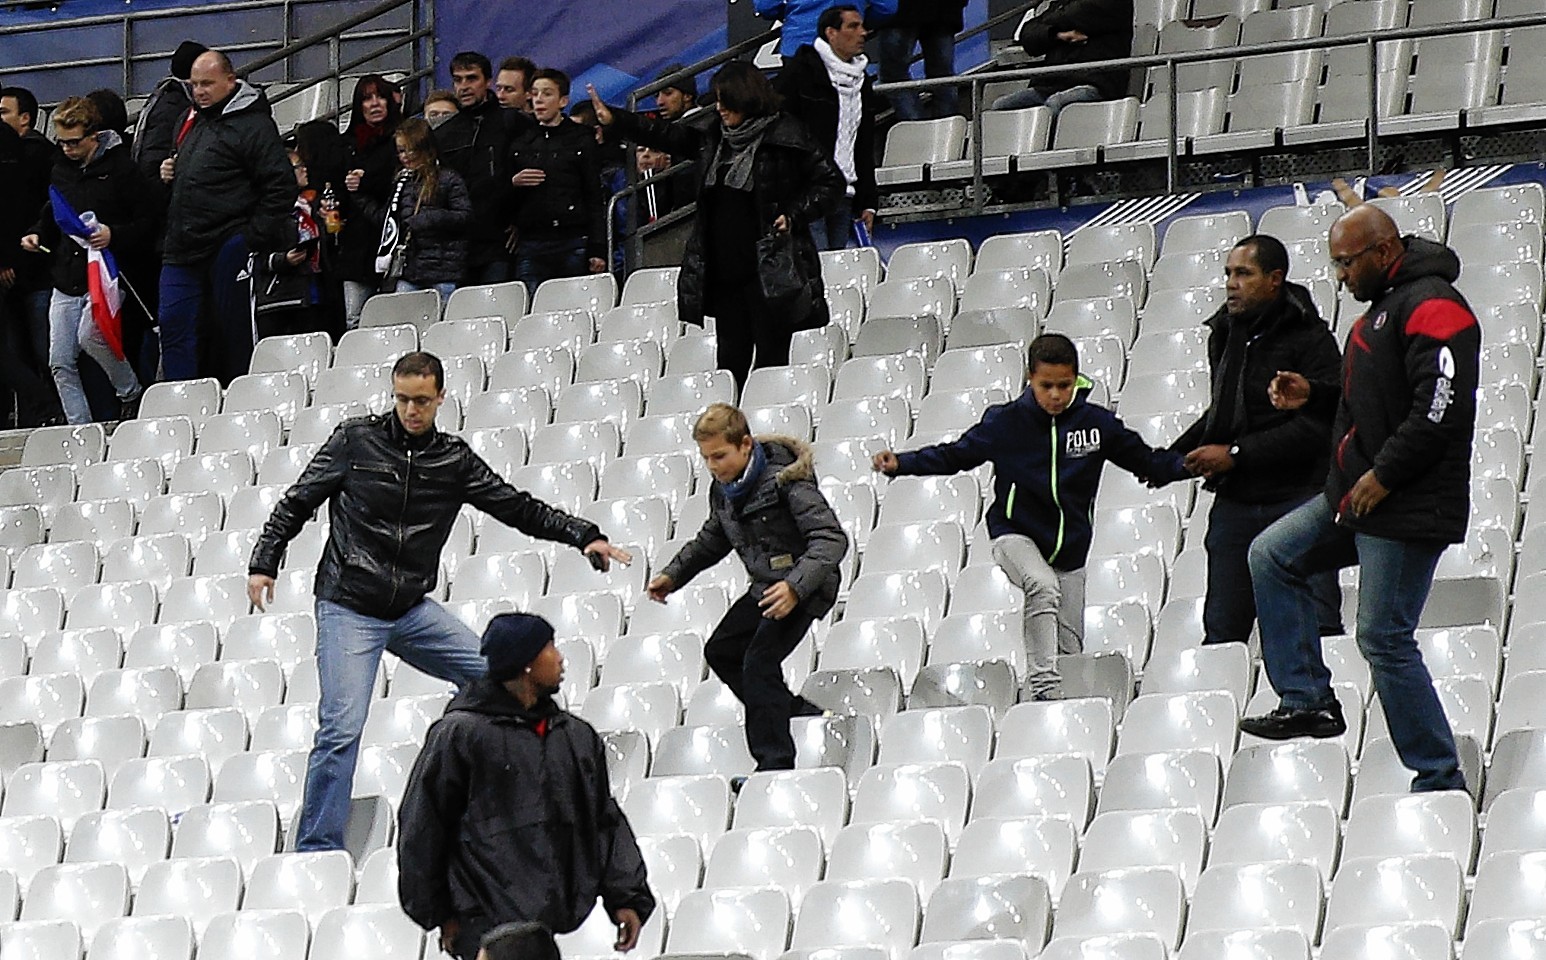 Soccer fans leave the Stade de France stadium after an international friendly soccer match in Saint Denis, outside Paris, Friday, Nov. 13, 2015. An explosion occurred outside the stadium. Several dozen people were killed in a series of unprecedented attacks around Paris on Friday, French President Francois Hollande said, announcing that he was closing the country's borders and declaring a state of emergency. 